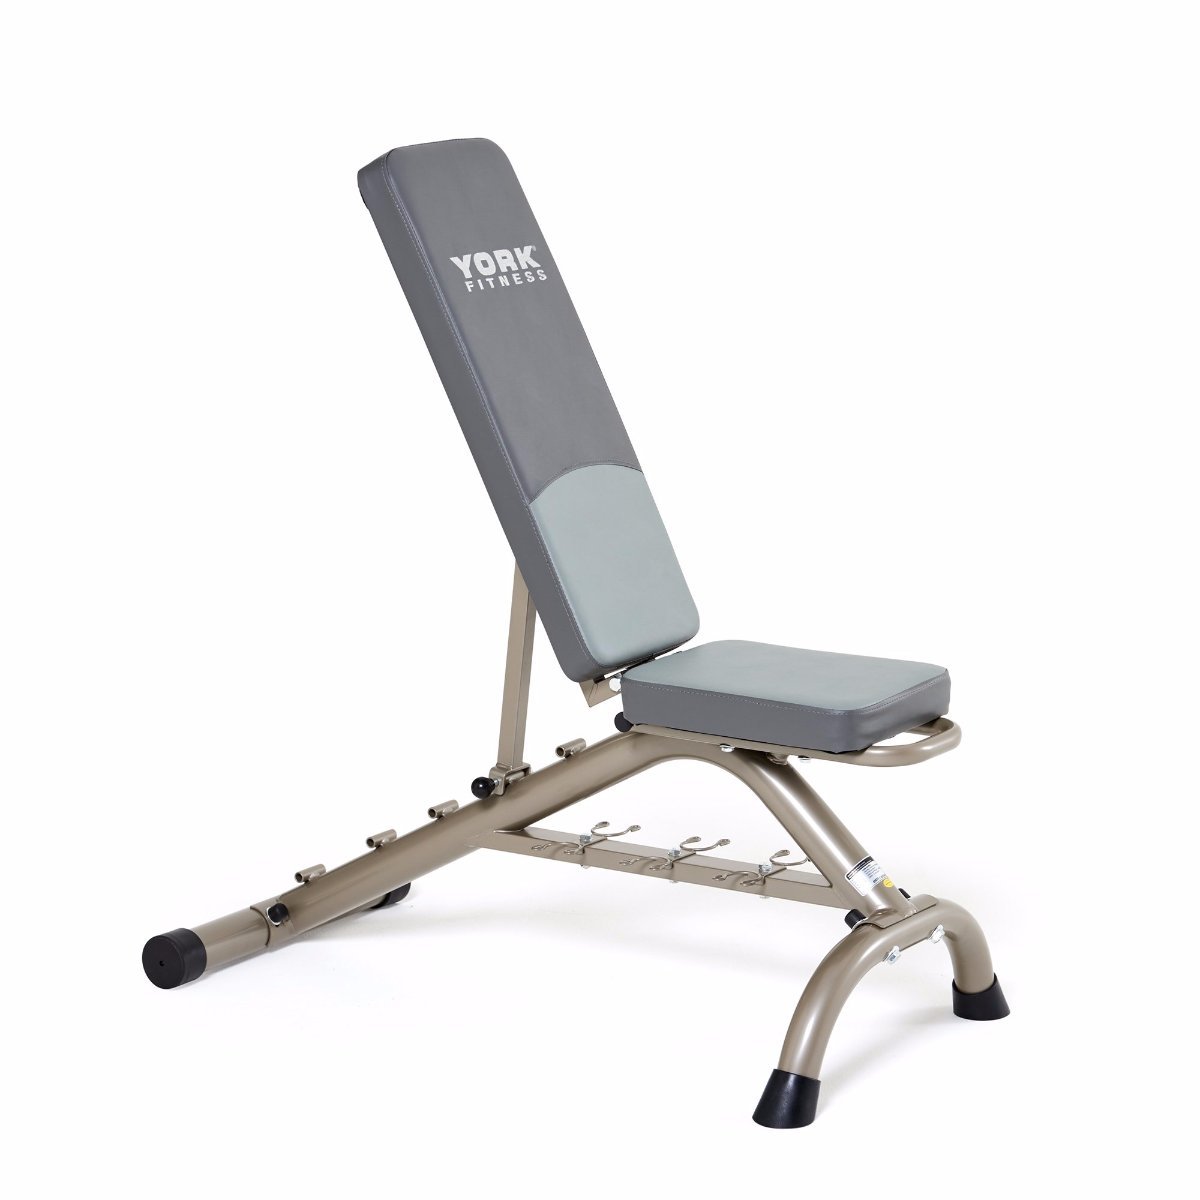 Adjustable Bench Press With Fitbell Storage York Barbell